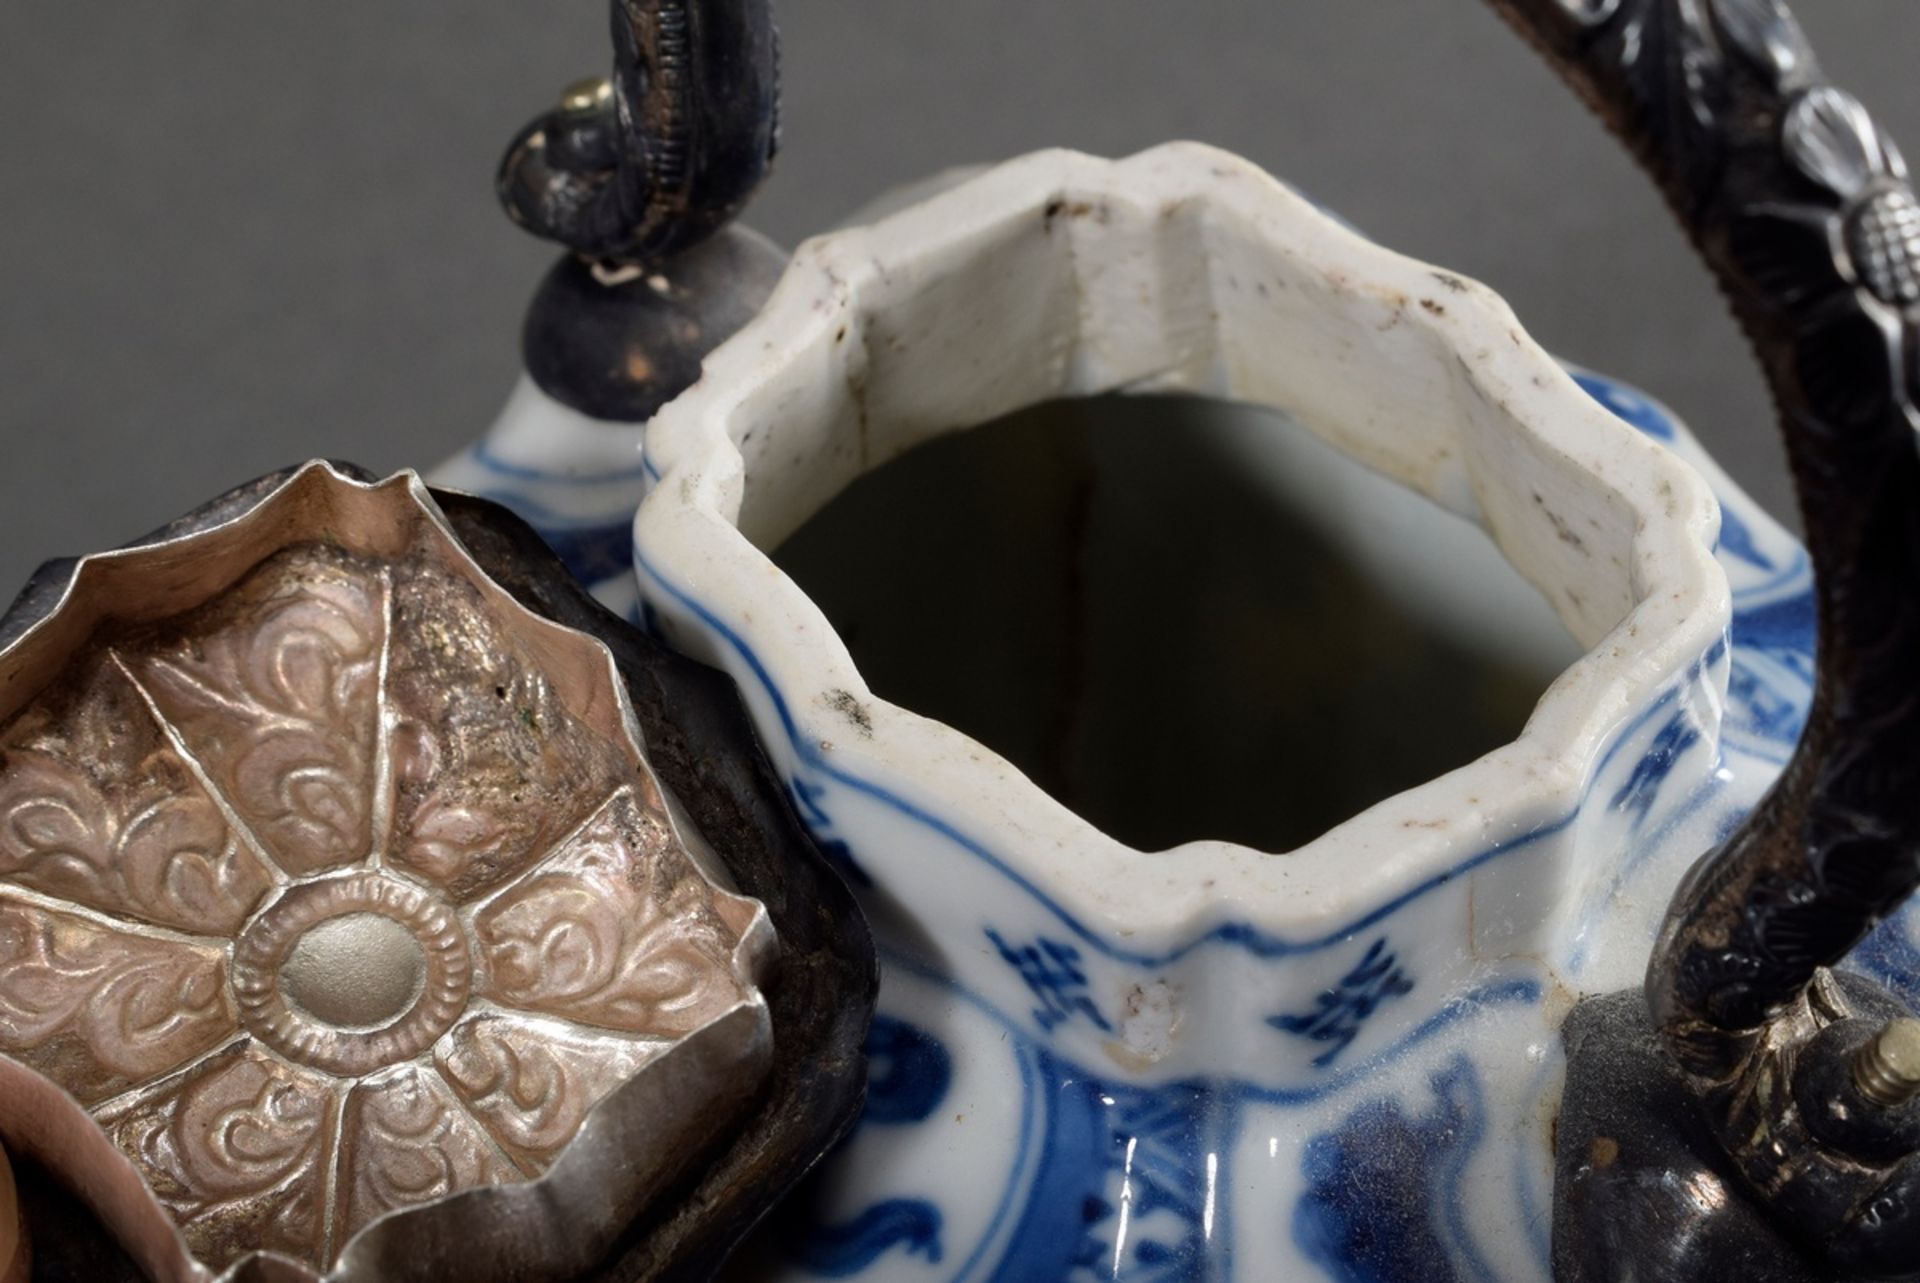 Small Chinese teapot with blue painting decor "Buddhist Symbols and Scholar Objects" on faceted wal - Image 4 of 6